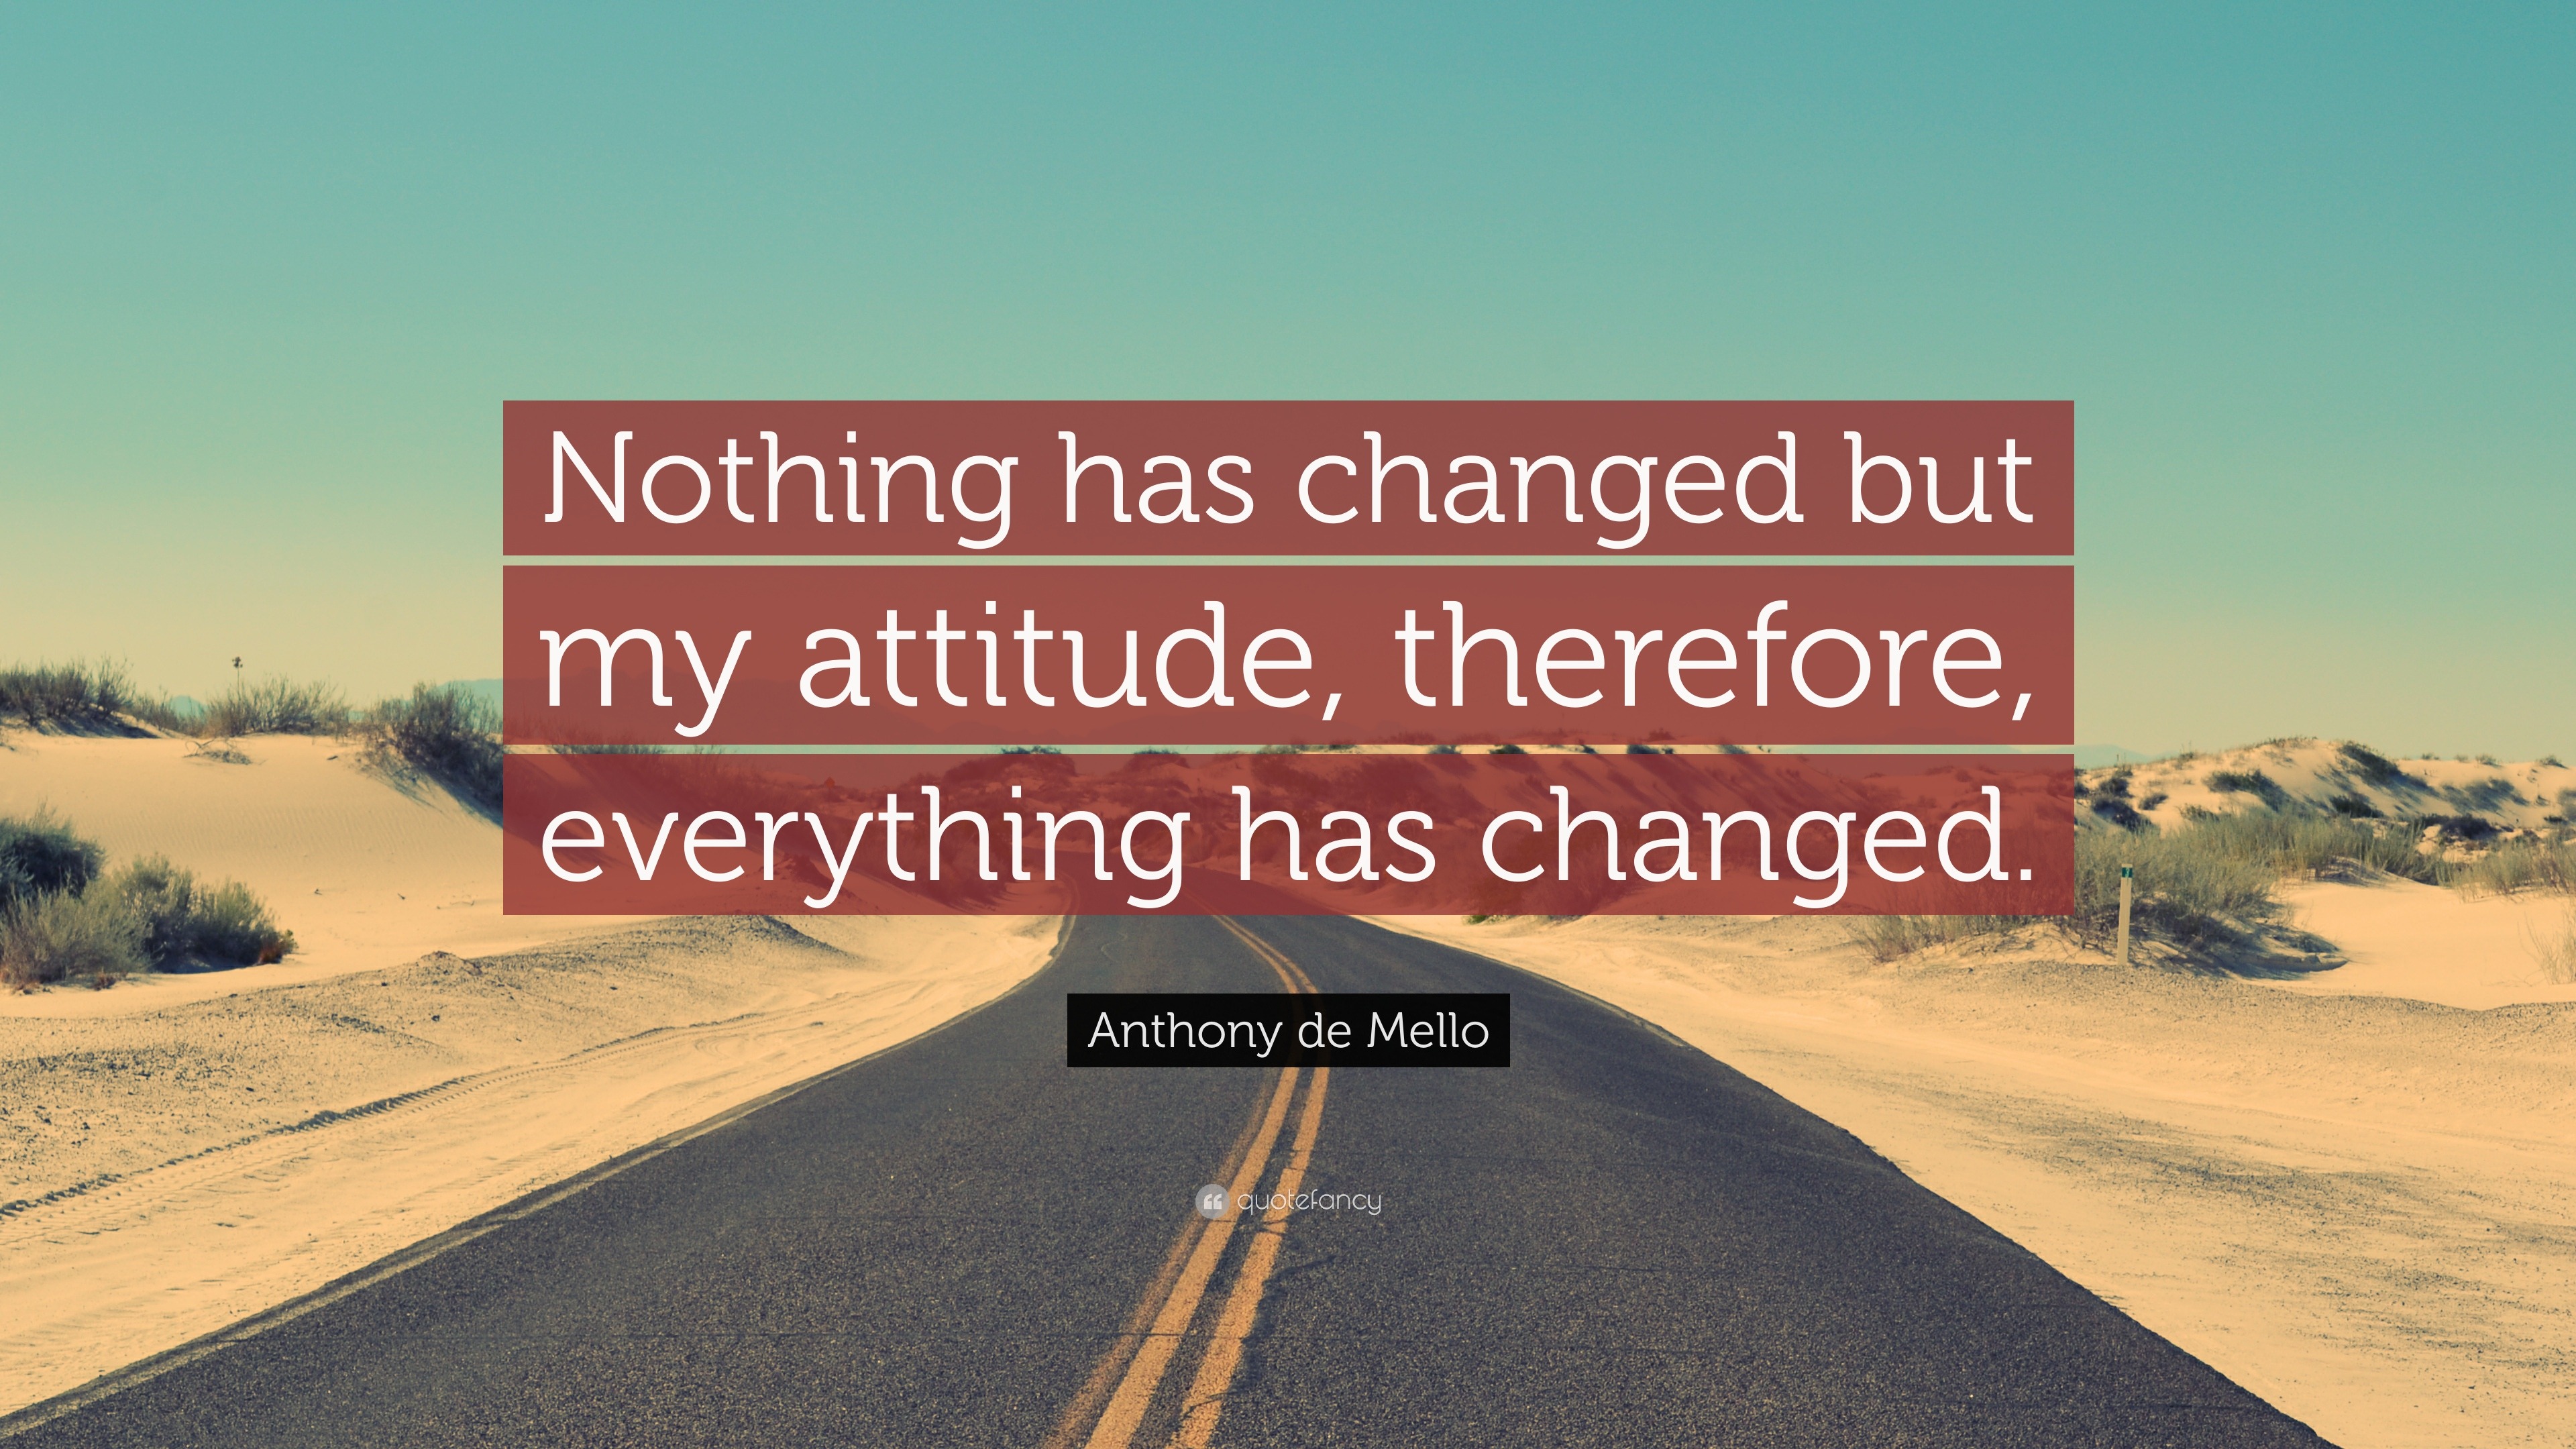 Anthony de Mello Quote: “Nothing has changed but my attitude, therefore